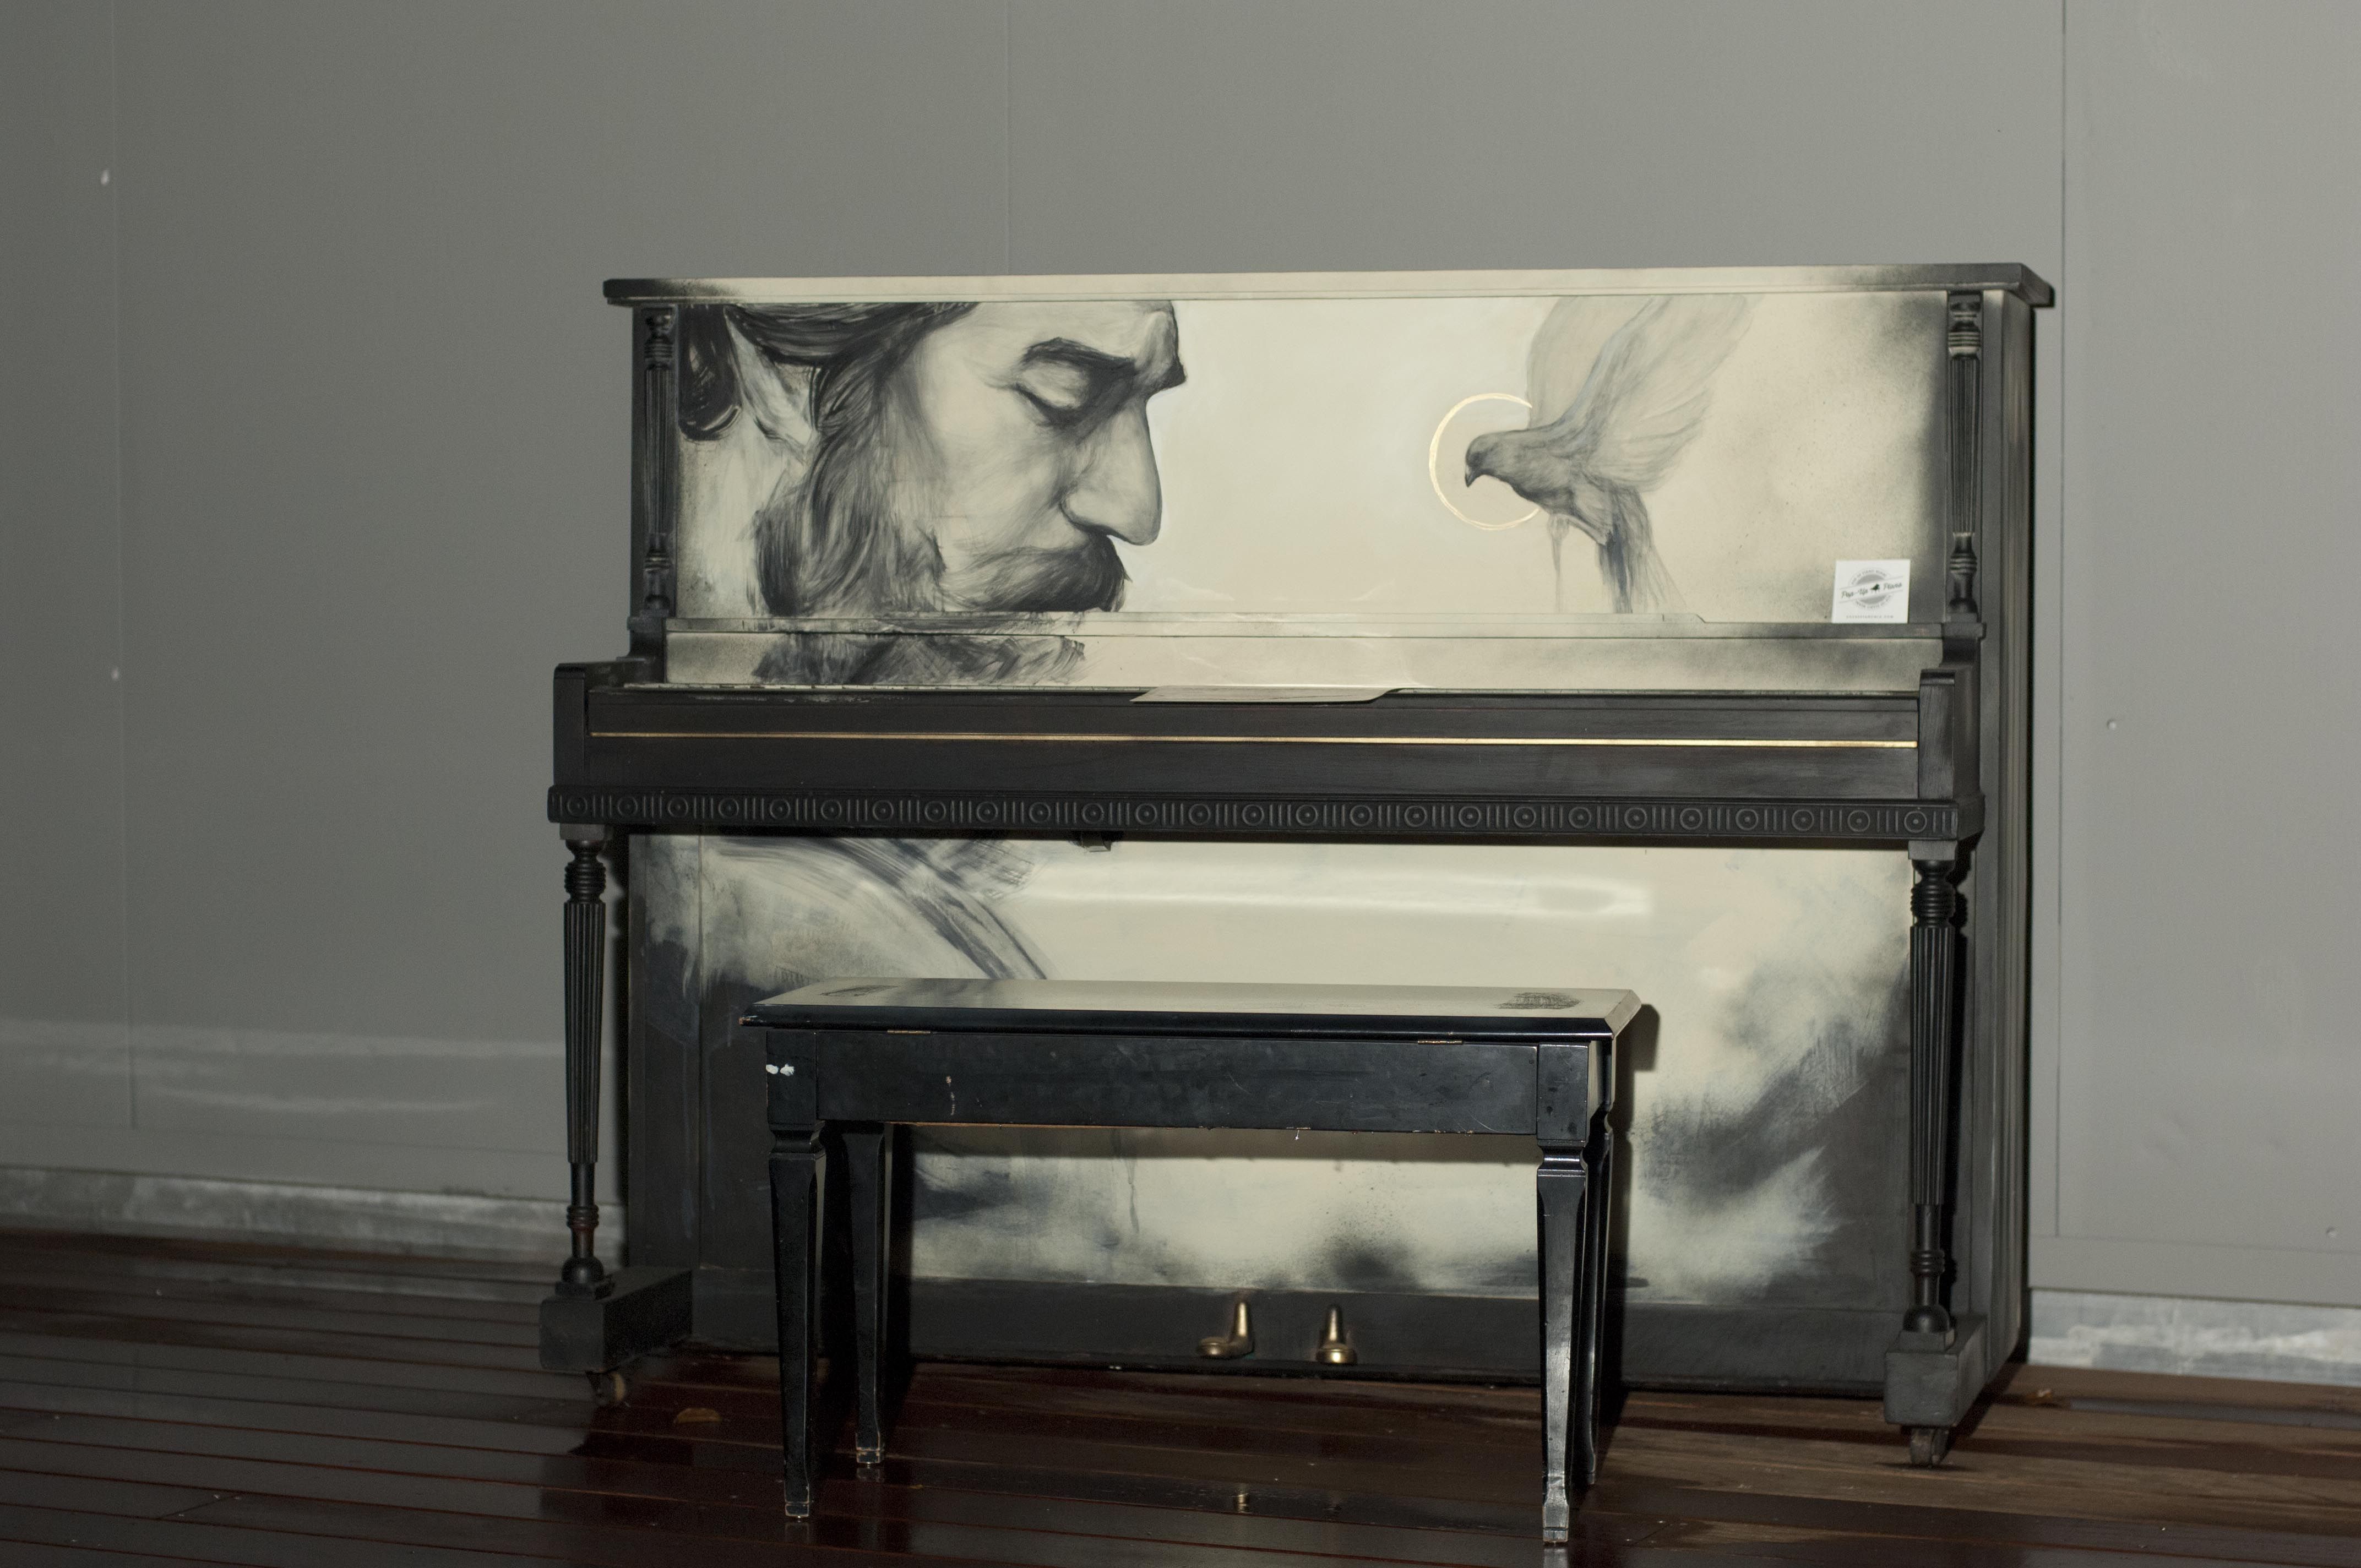 Piano by Evoca1 at Pop Up Miami Concert